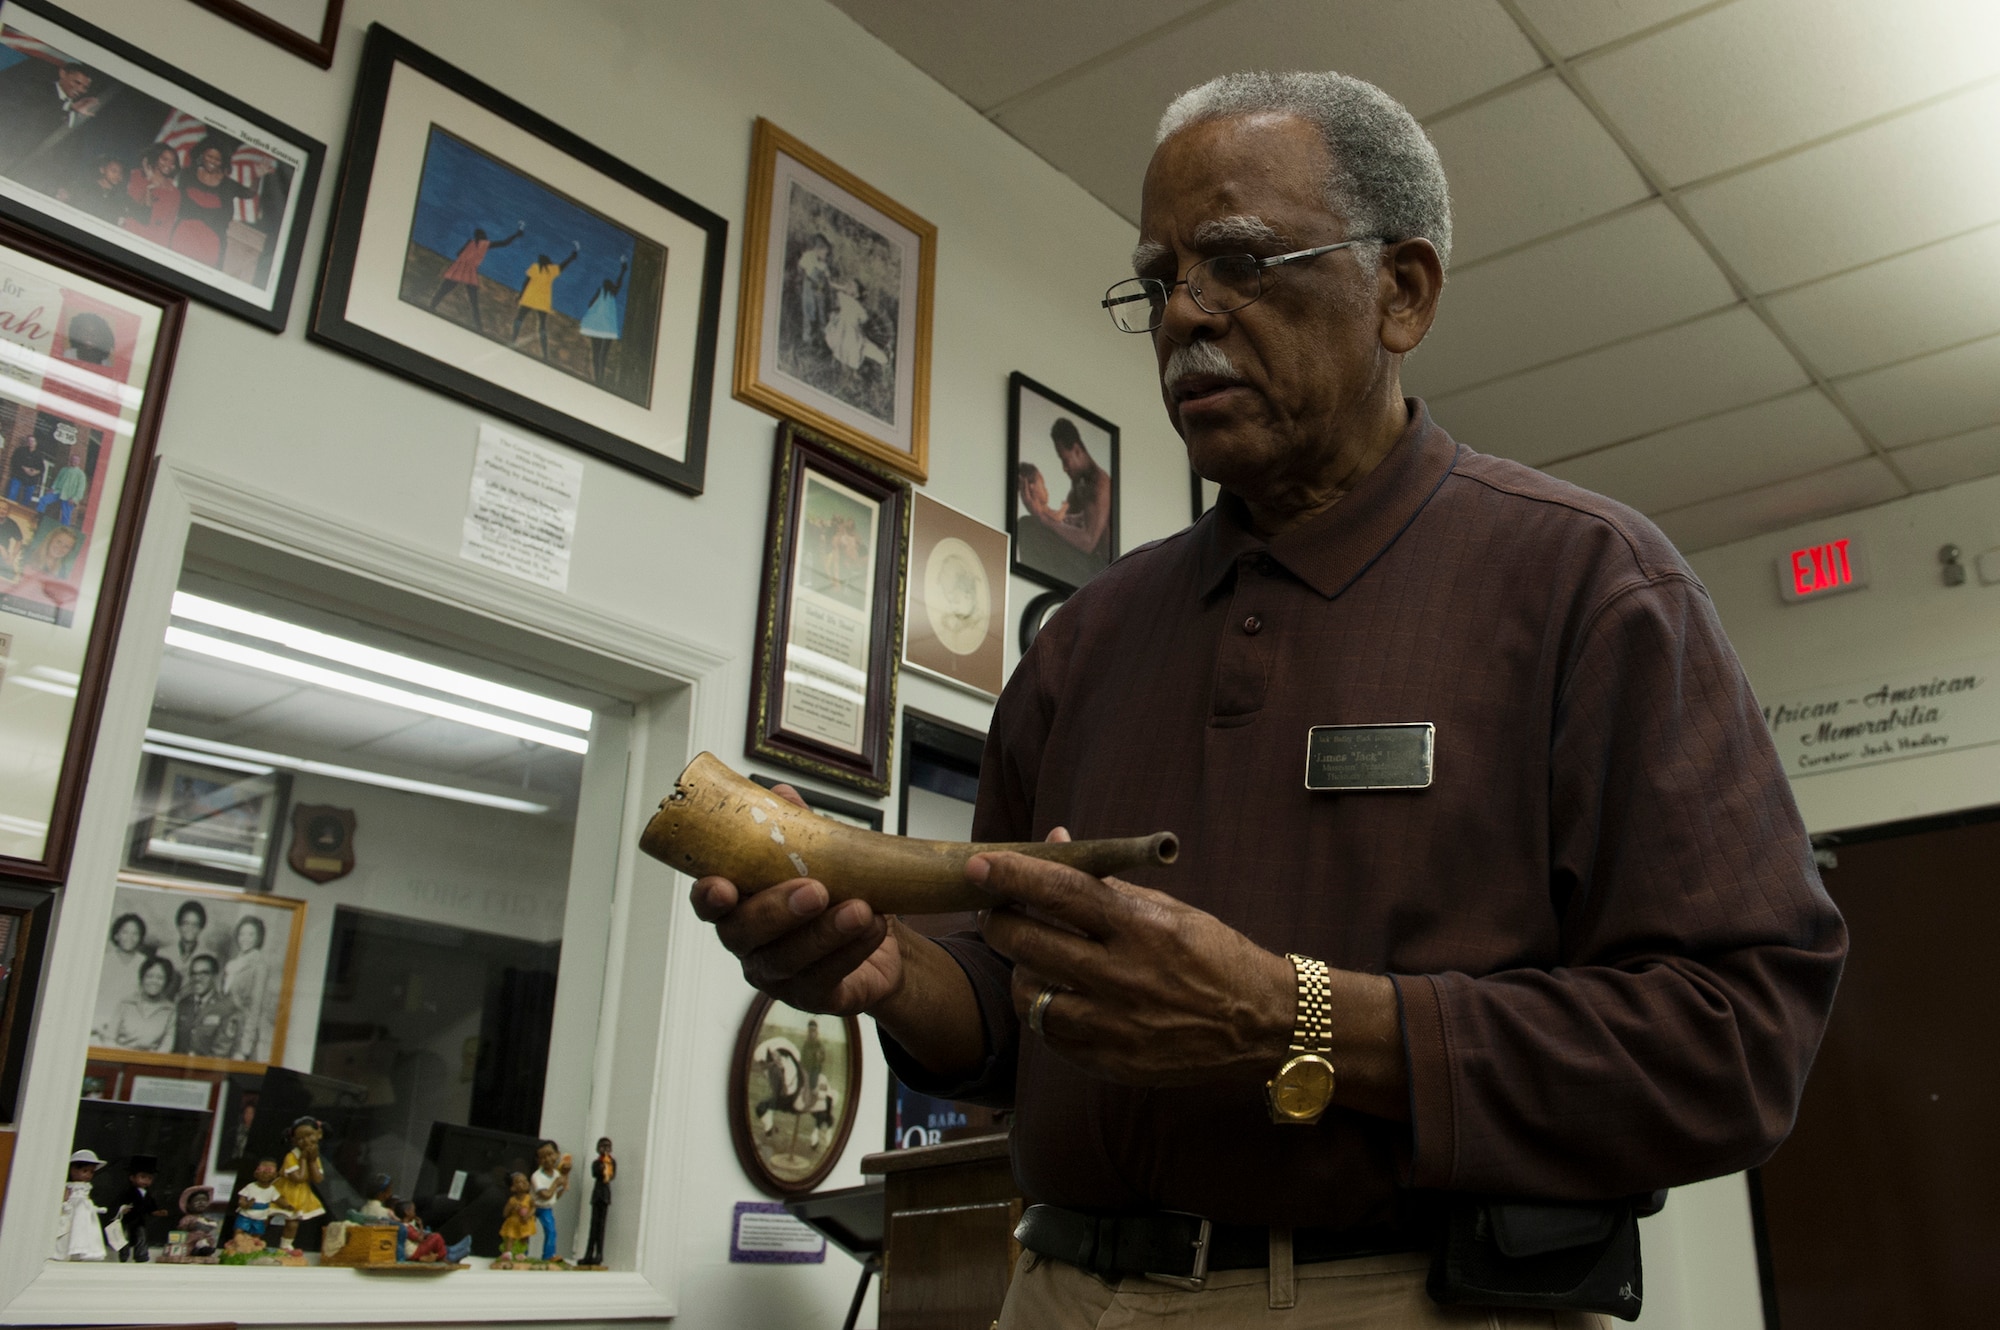 Retired U.S. Air Force Chief Master Sgt. James “Jack” Hadley, Black History Museum curator, holds a signal horn, Feb. 8, 2016, at the Jack Hadley Black History Museum in Thomasville, Ga. The horn is a Hadley family heirloom which has been passed down since approximately 1850. (U.S. Air Force photo by Airman 1st Class Kathleen D. Bryant/Released)
